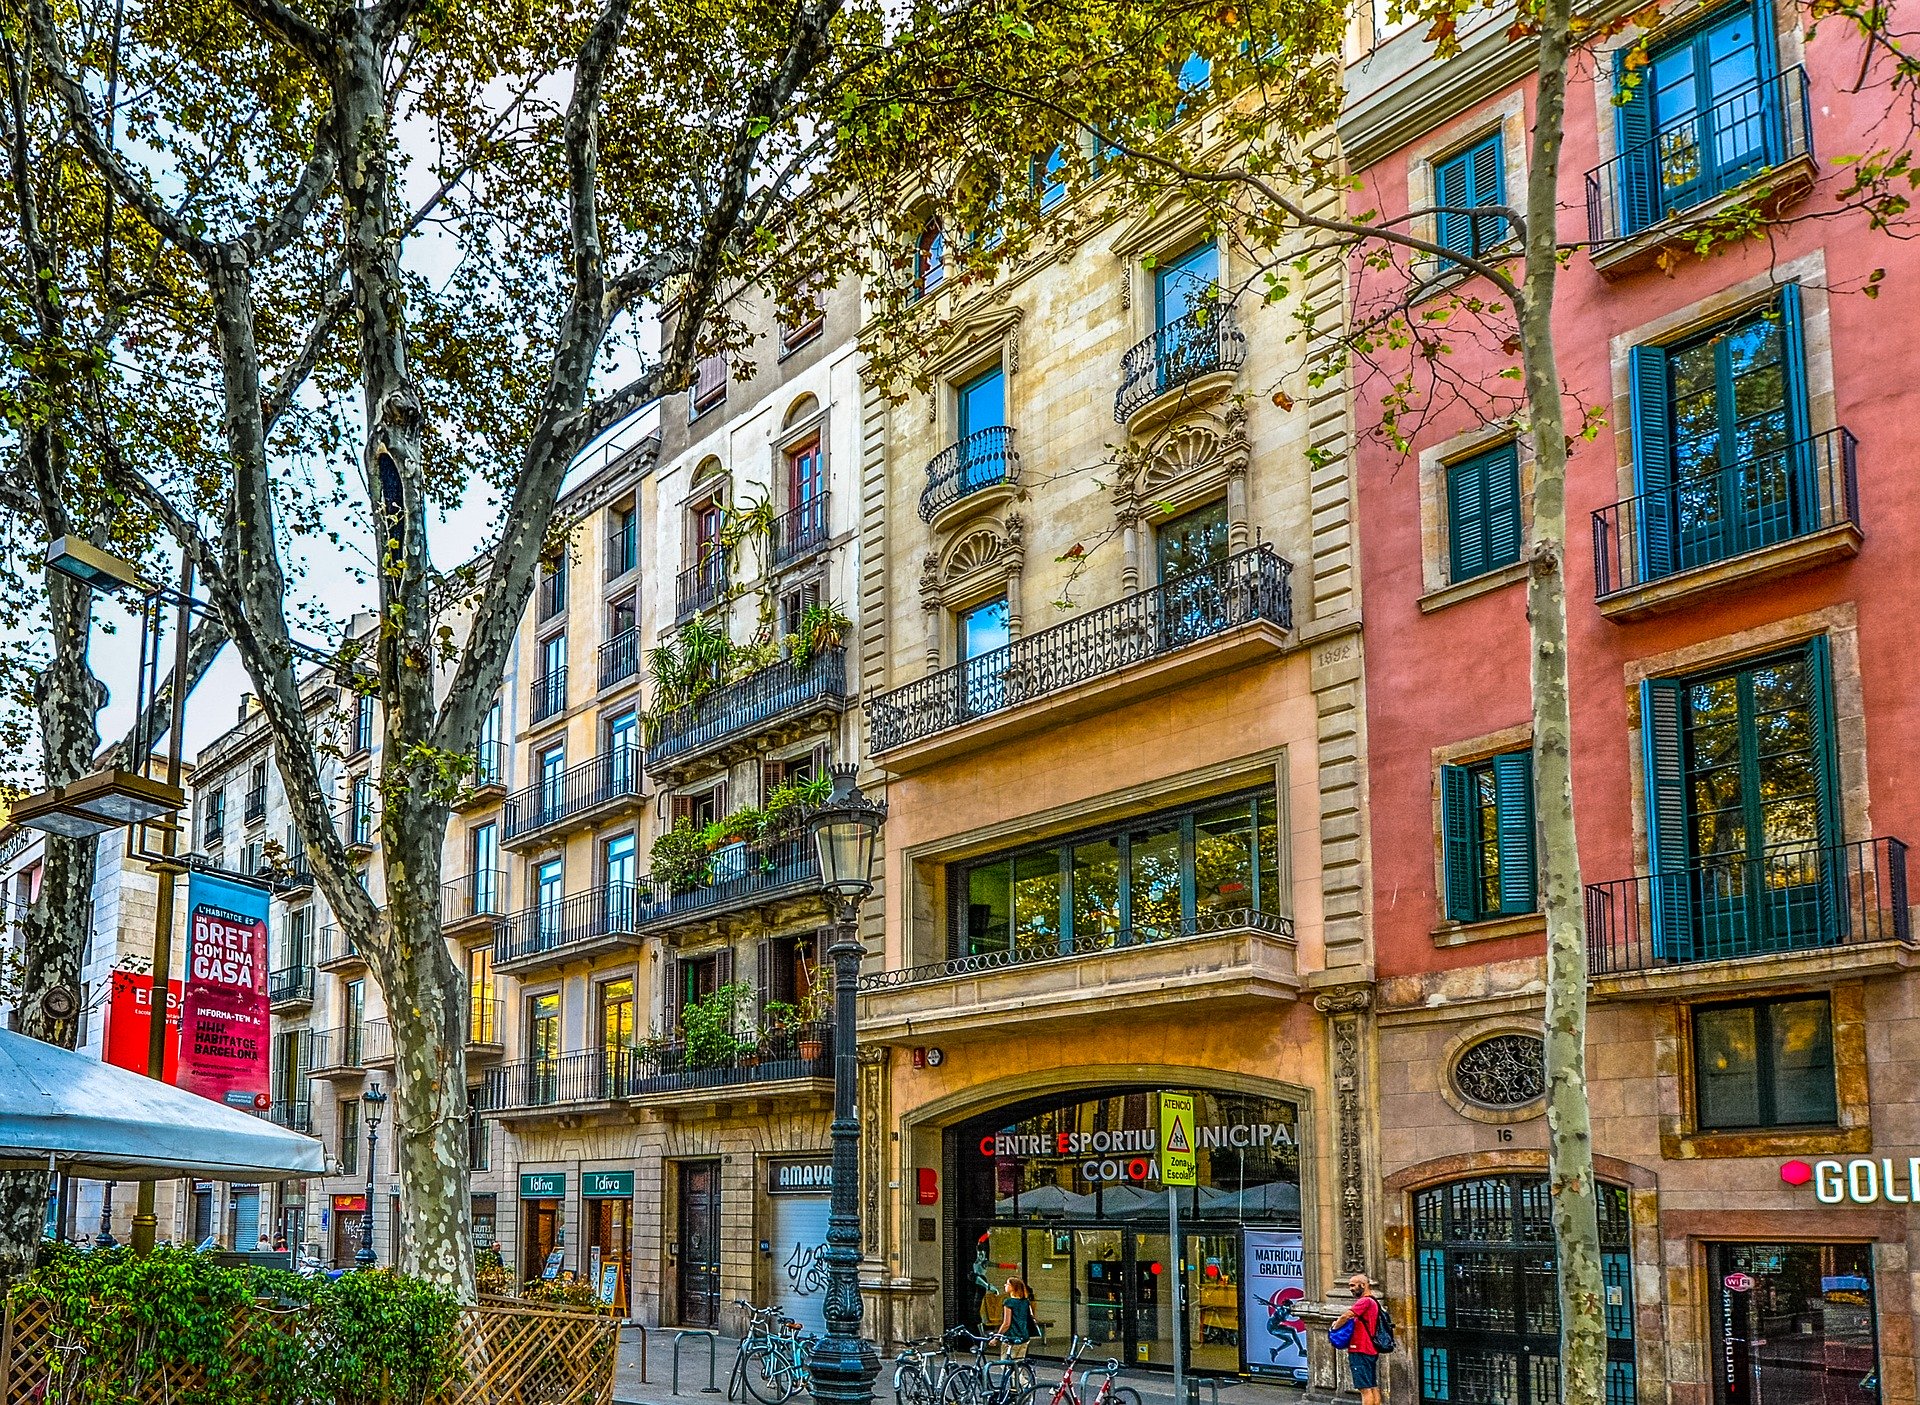 News: Real Estate in Barcelona and Spain - January 2020 2 News: Real Estate in Barcelona and Spain - January 2020